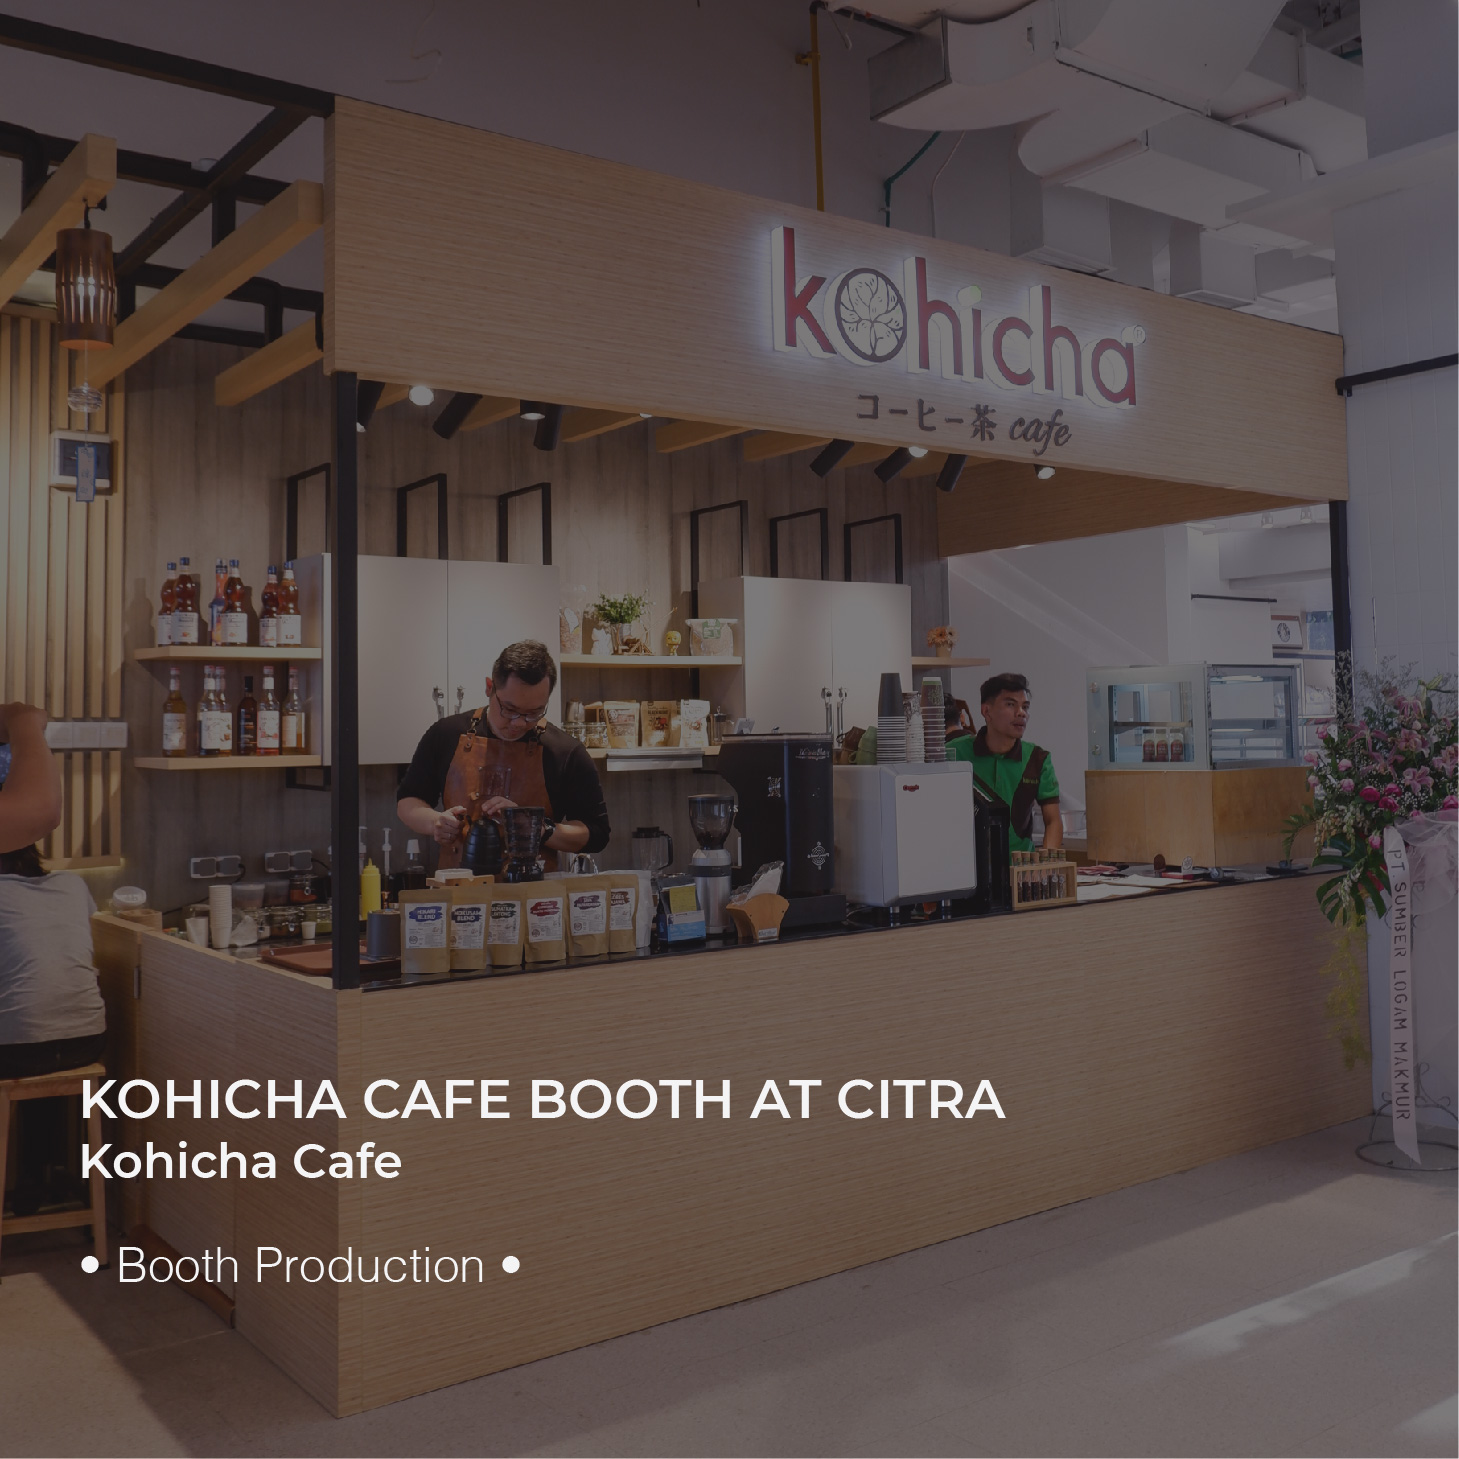 Portfolio_Page Projects_size 700x700px_Kohicha Cafe Booth 02